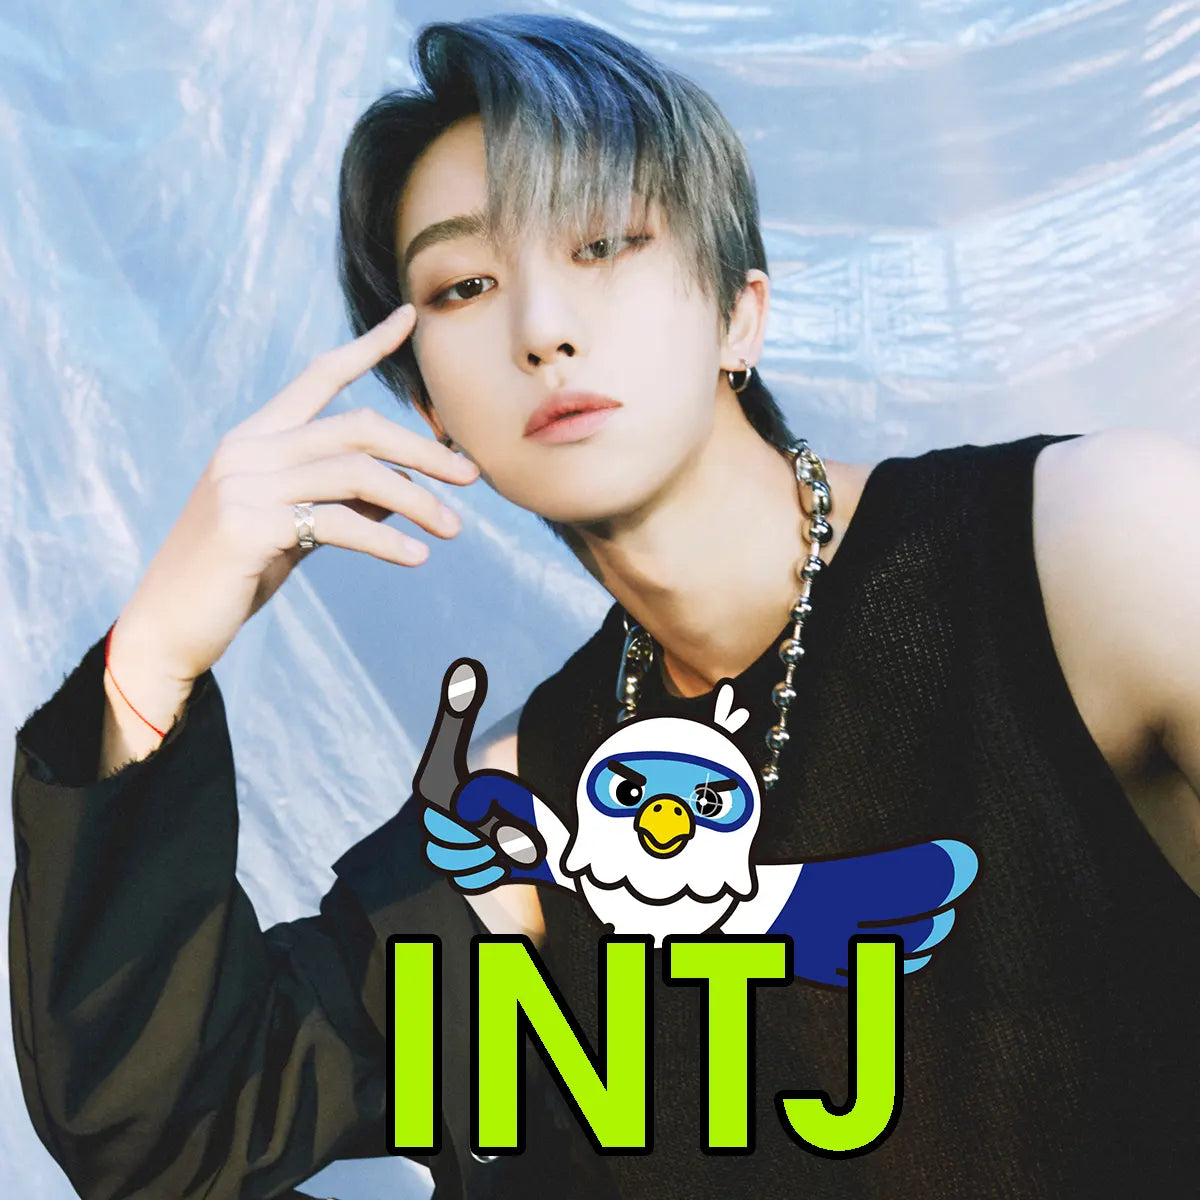 Yoon Bum's Friend Personality Type, MBTI - Which Personality?